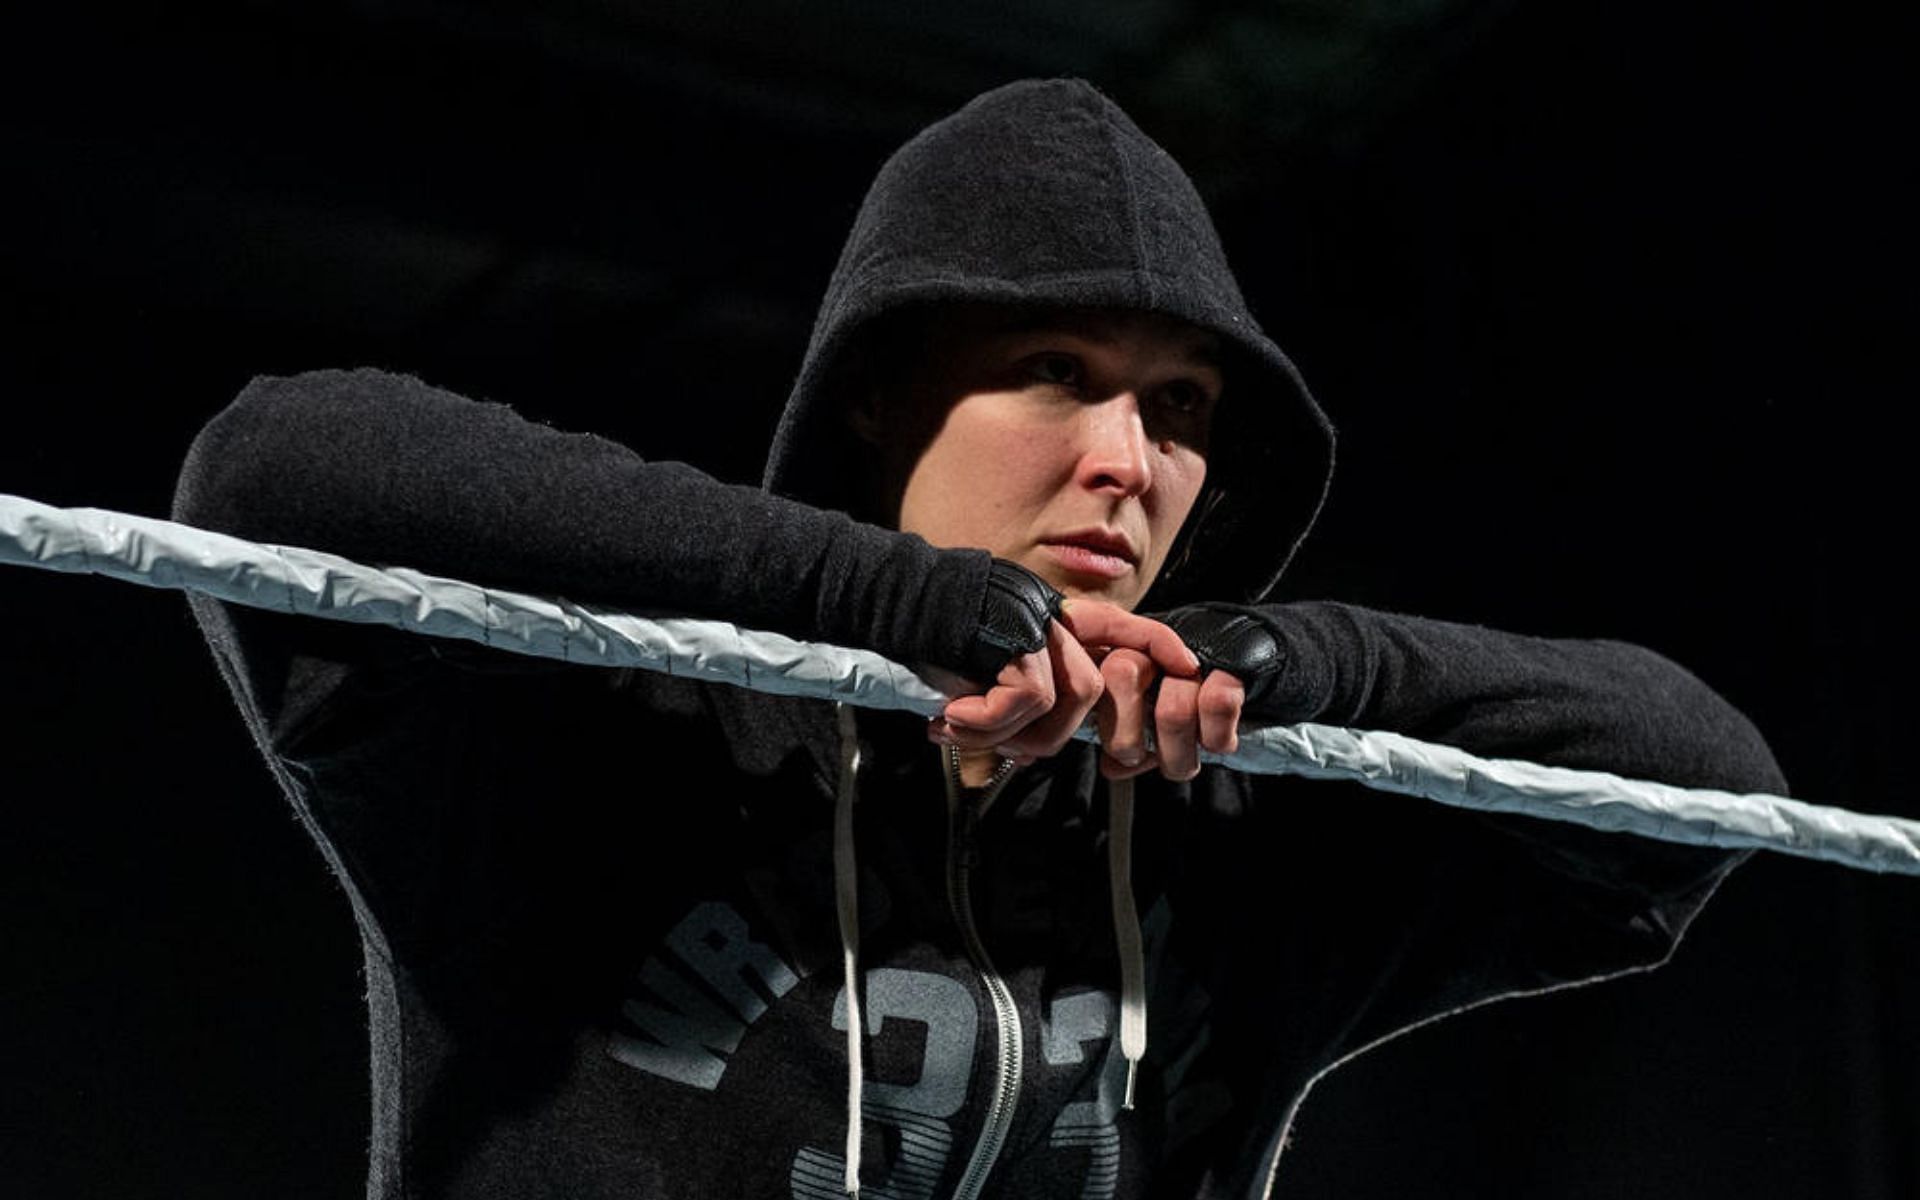 Ronda Rousey is a former RAW Women